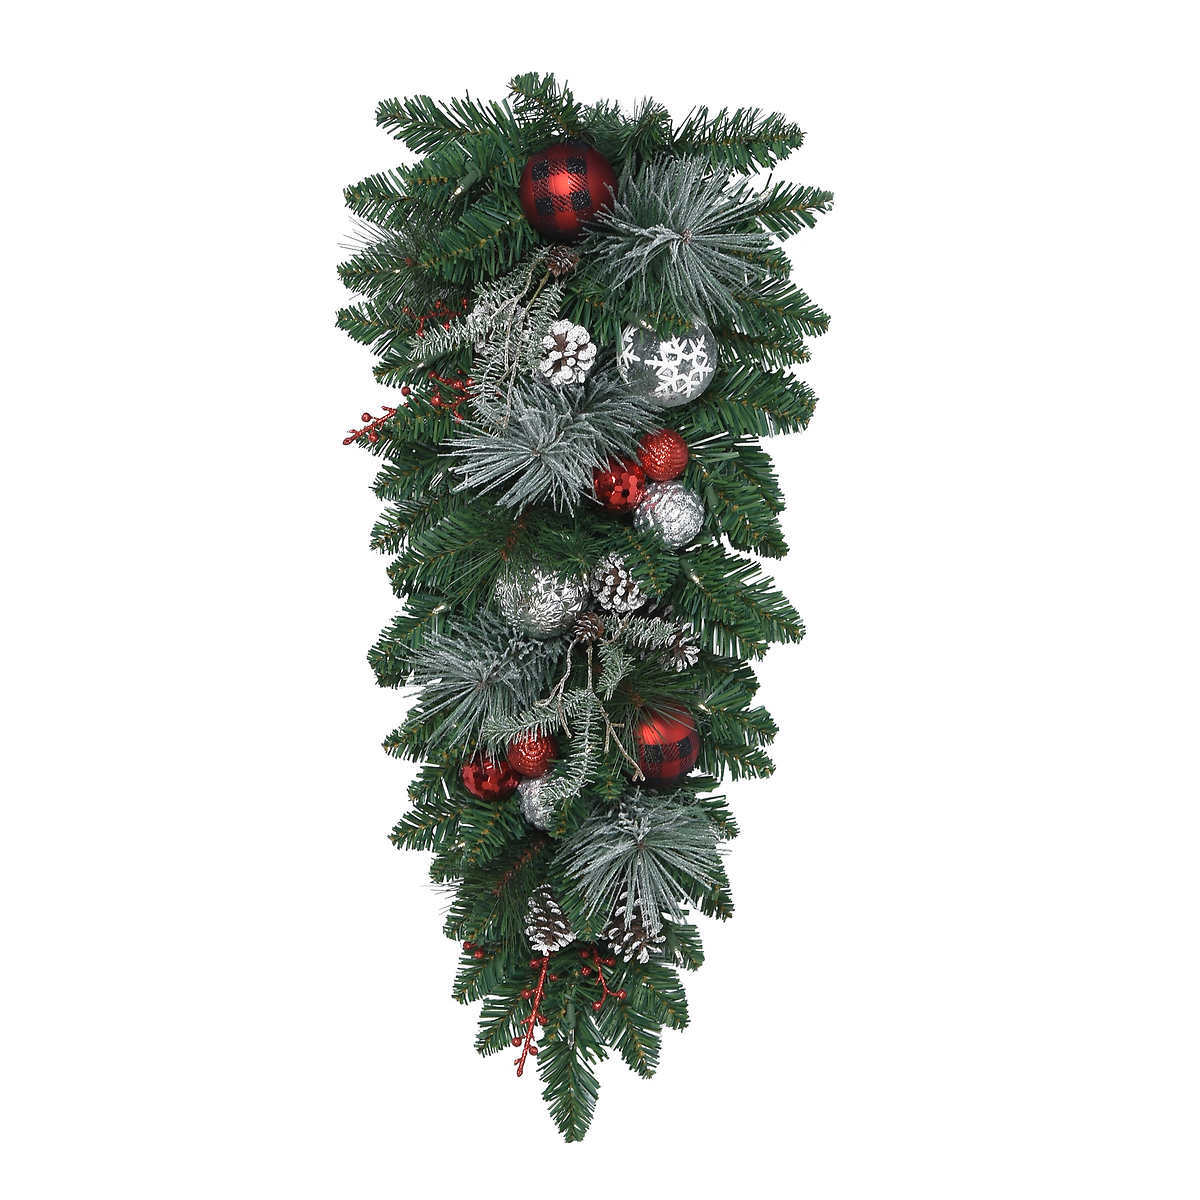 32 Inch (81 cm) Christmas Illuminated Decorated Swag With 20 LED Lights 